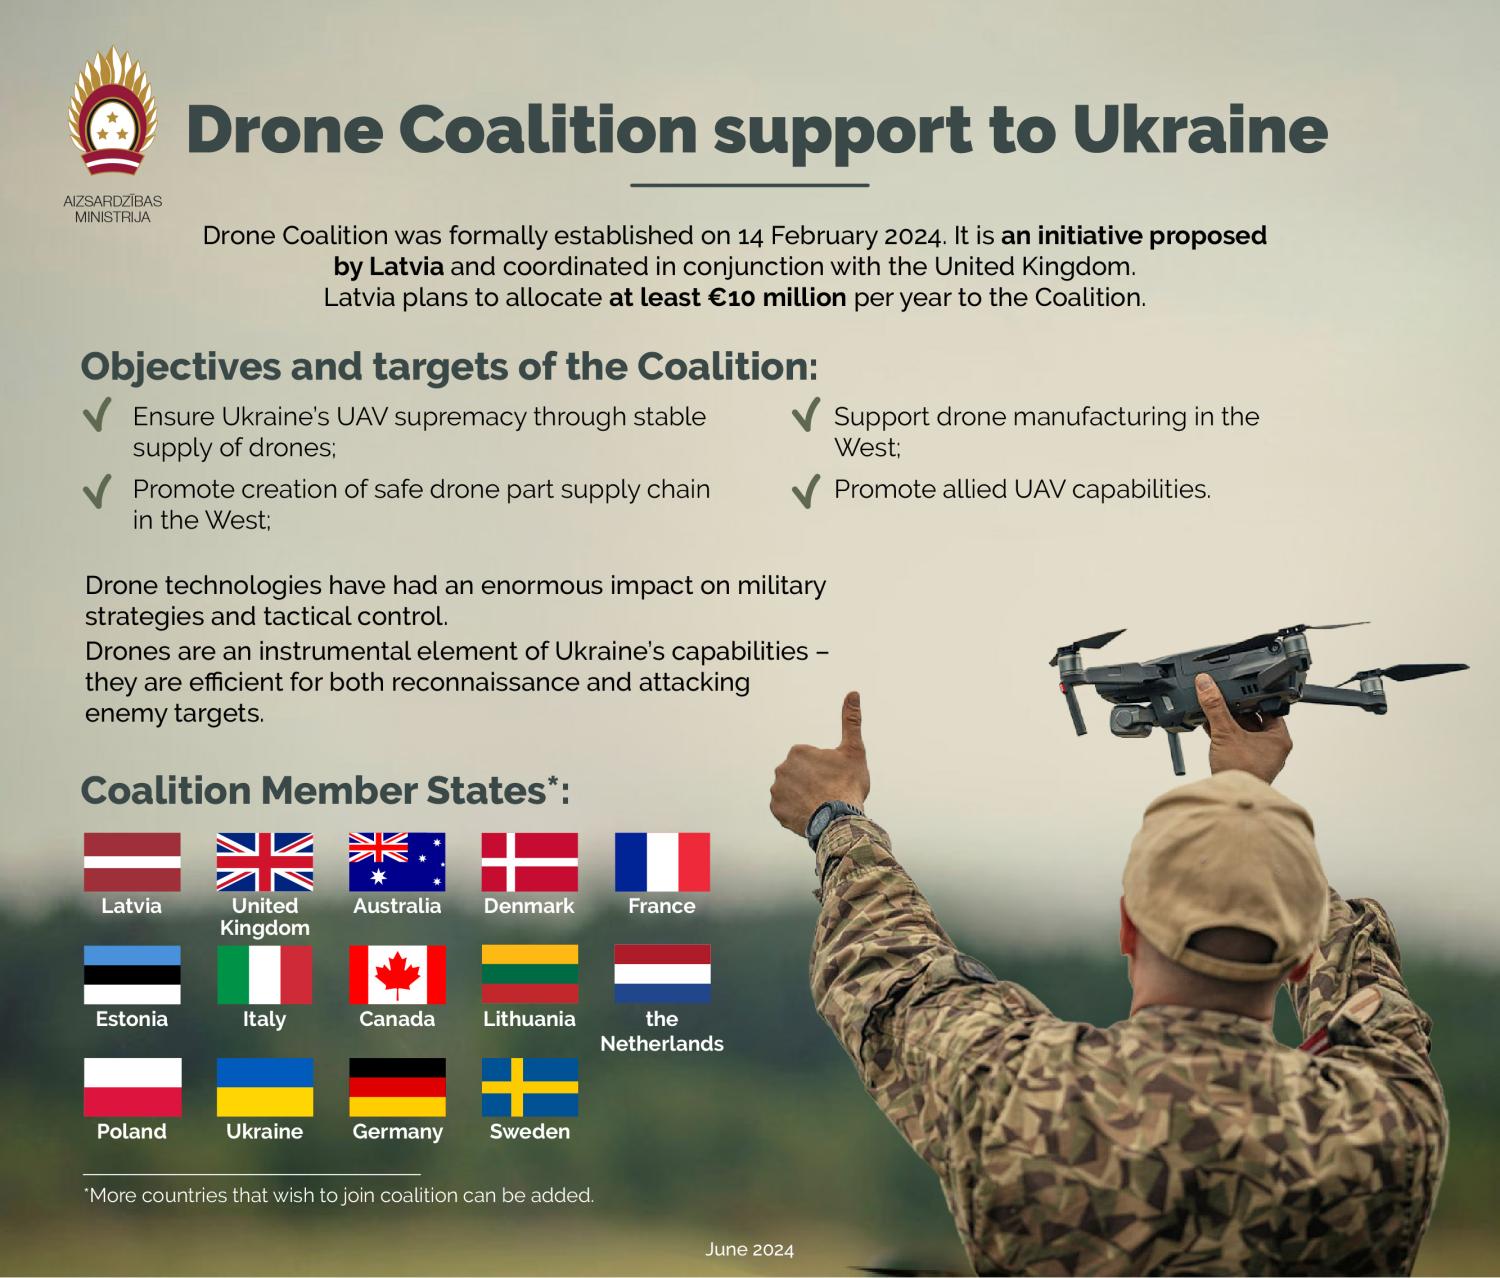 Drone Coalition support to Ukraine